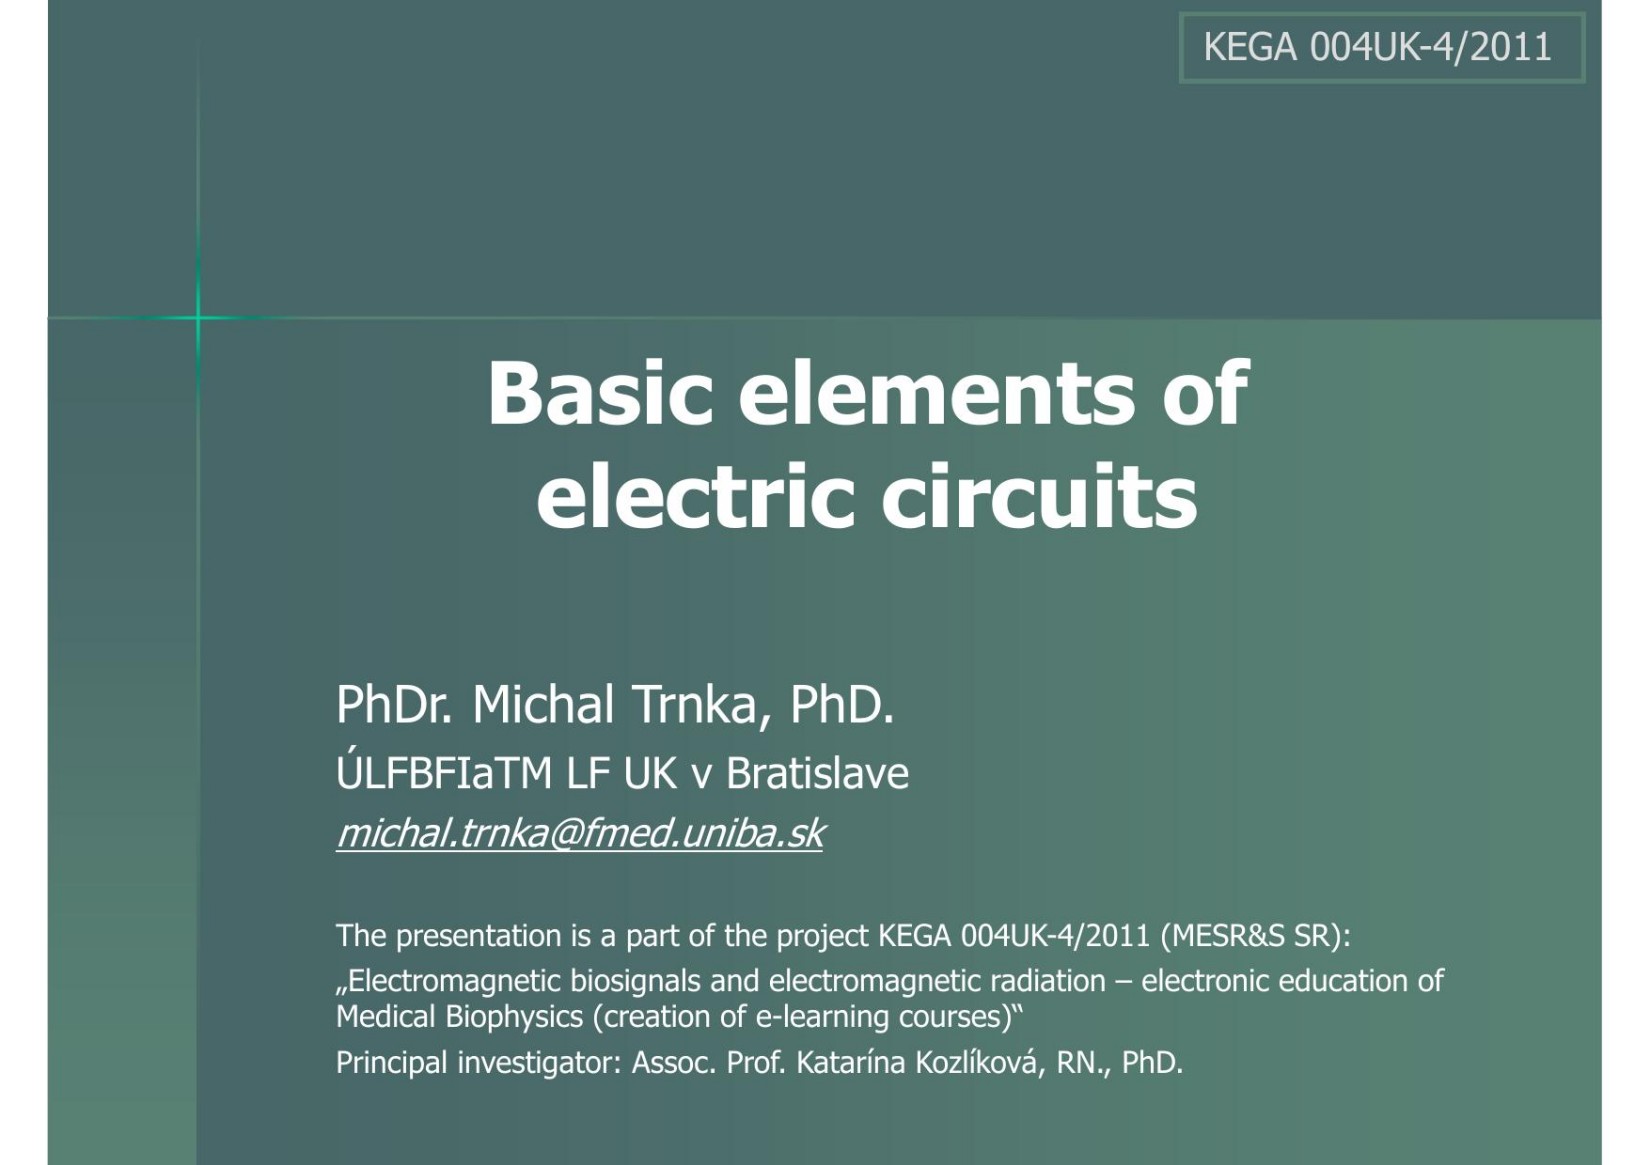 Basic Elements of Electric Circuit